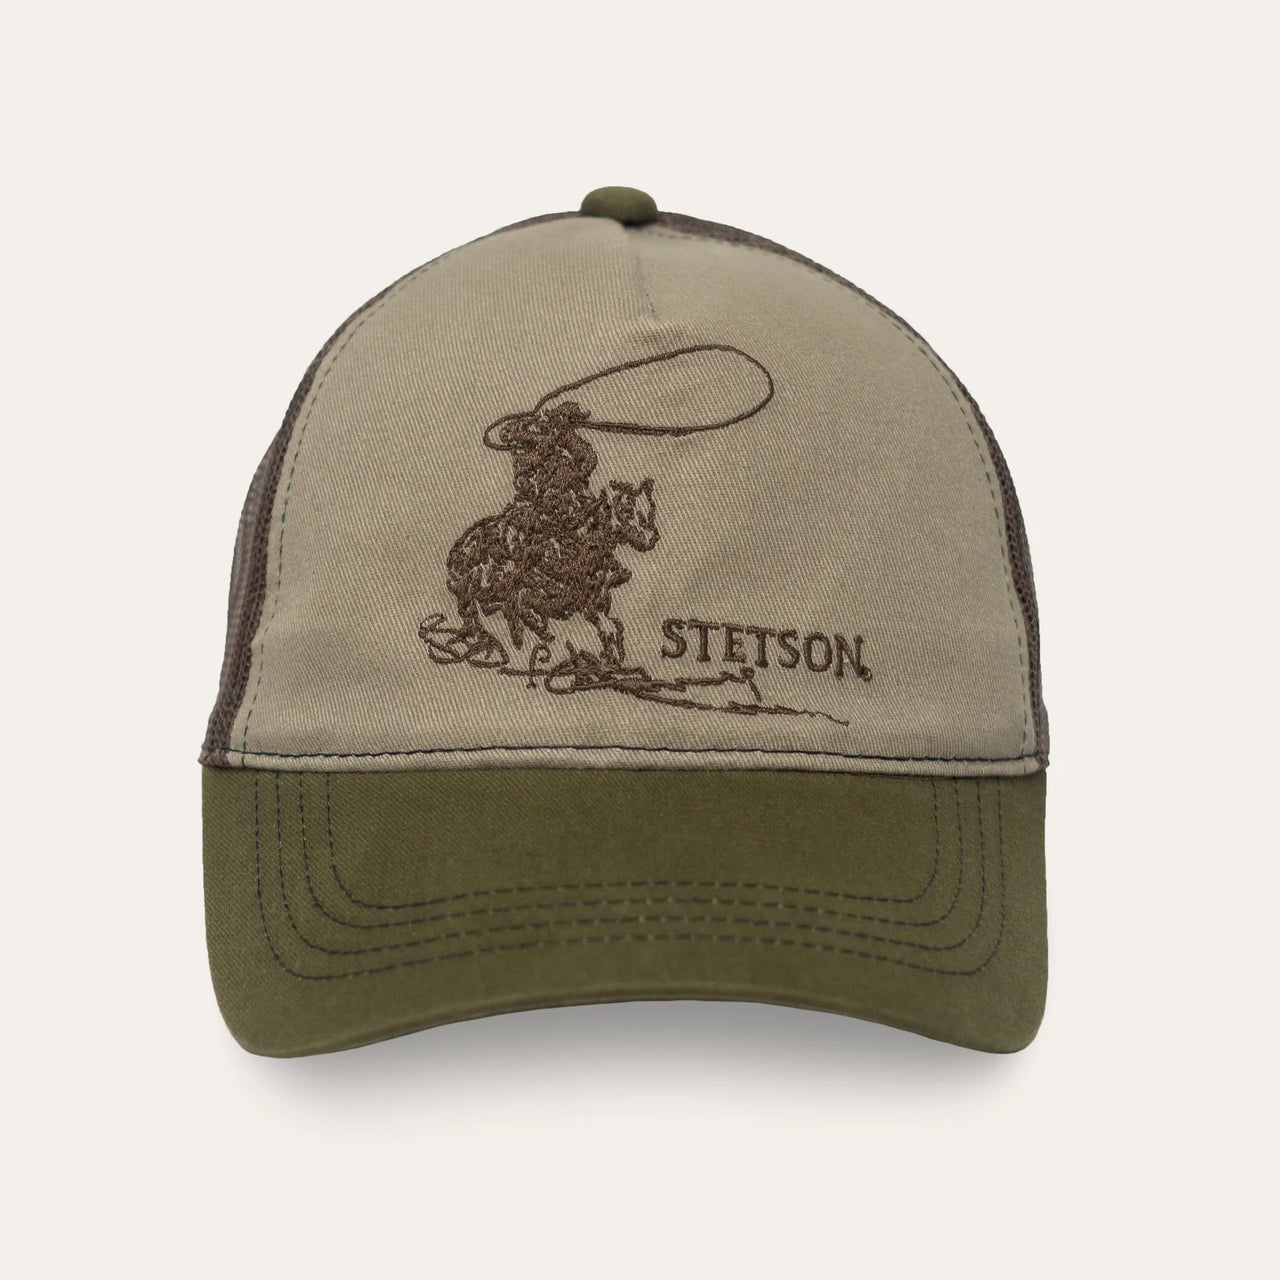 Stetson Lassoo Trucker Cap - The Trading Stables